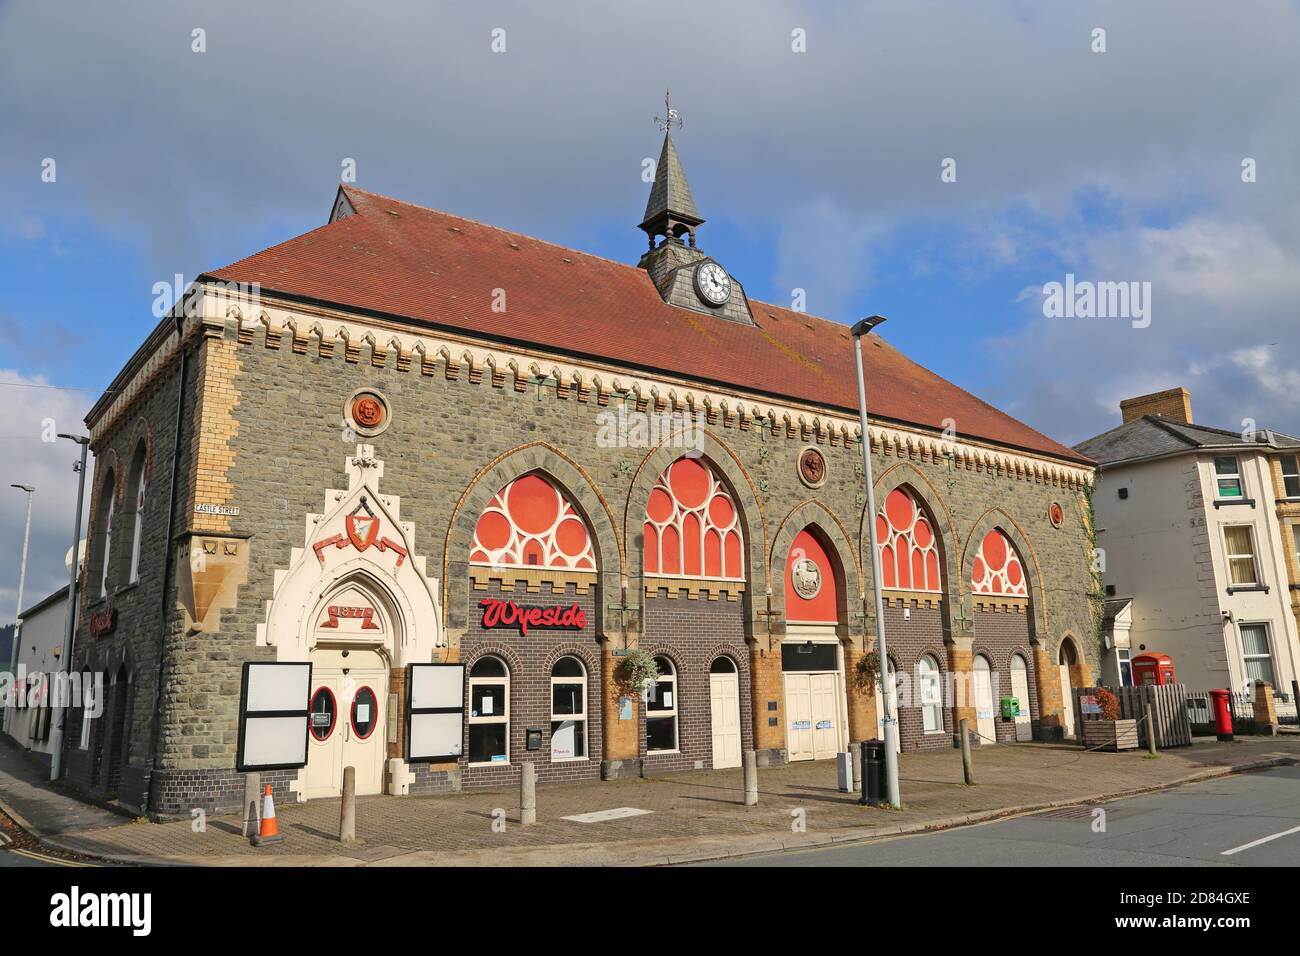 Wyeside Arts Centre, Castle Street, Builth Wells, Brecknockshire, Powys, Wales, Great Britain, United Kingdom, UK, Europe Stock Photo